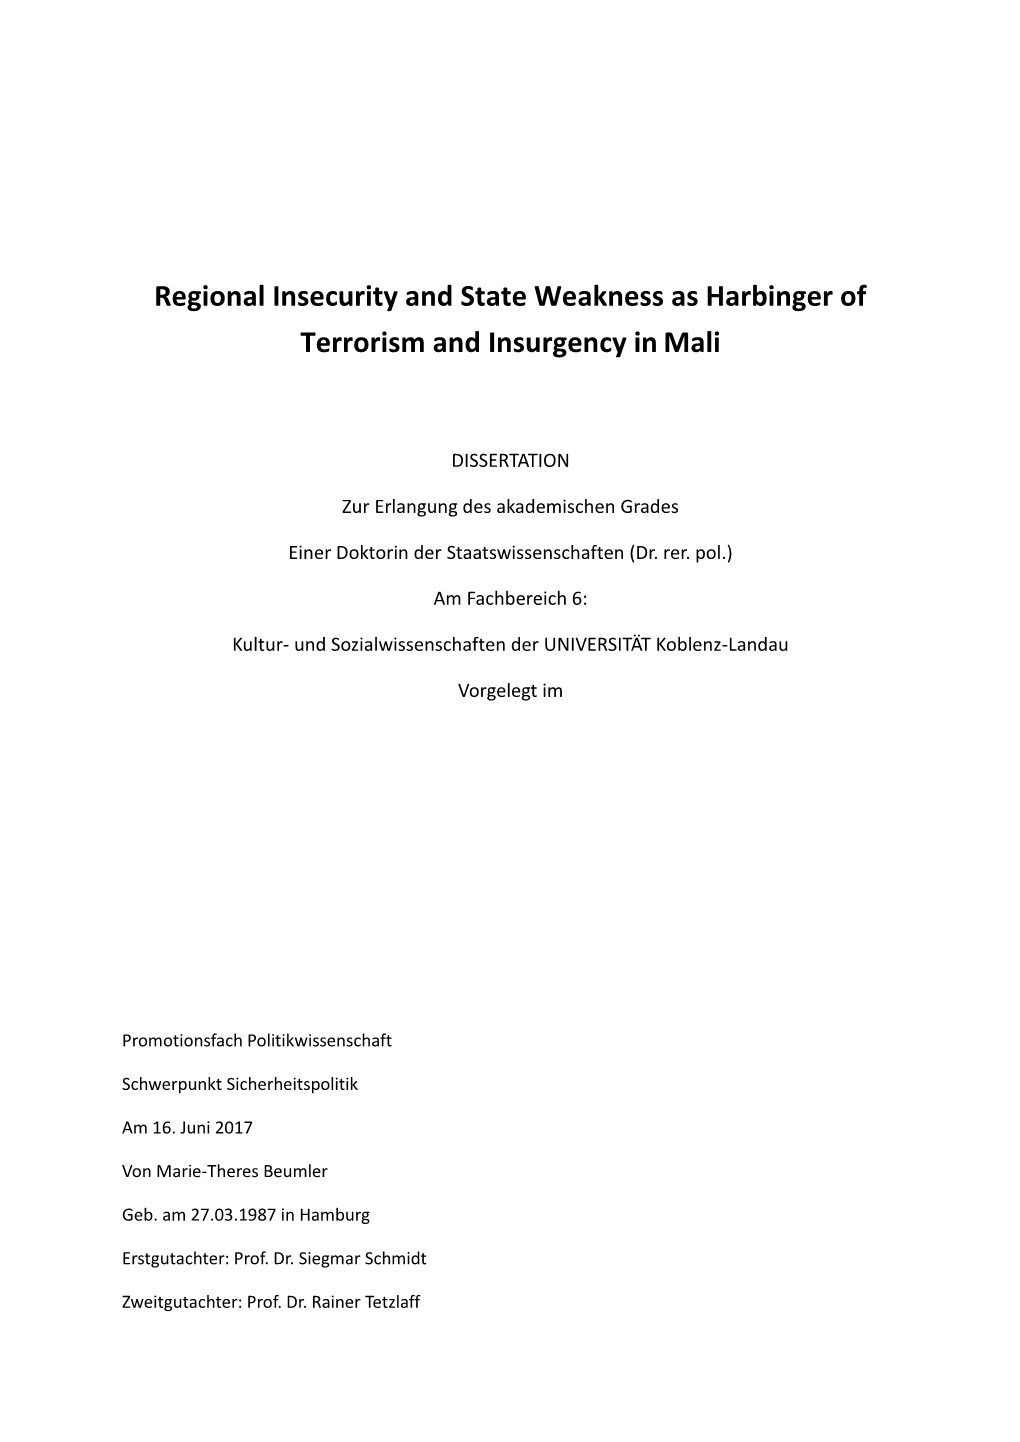 Regional Insecurity and State Weakness As Harbinger of Terrorism and Insurgency in Mali